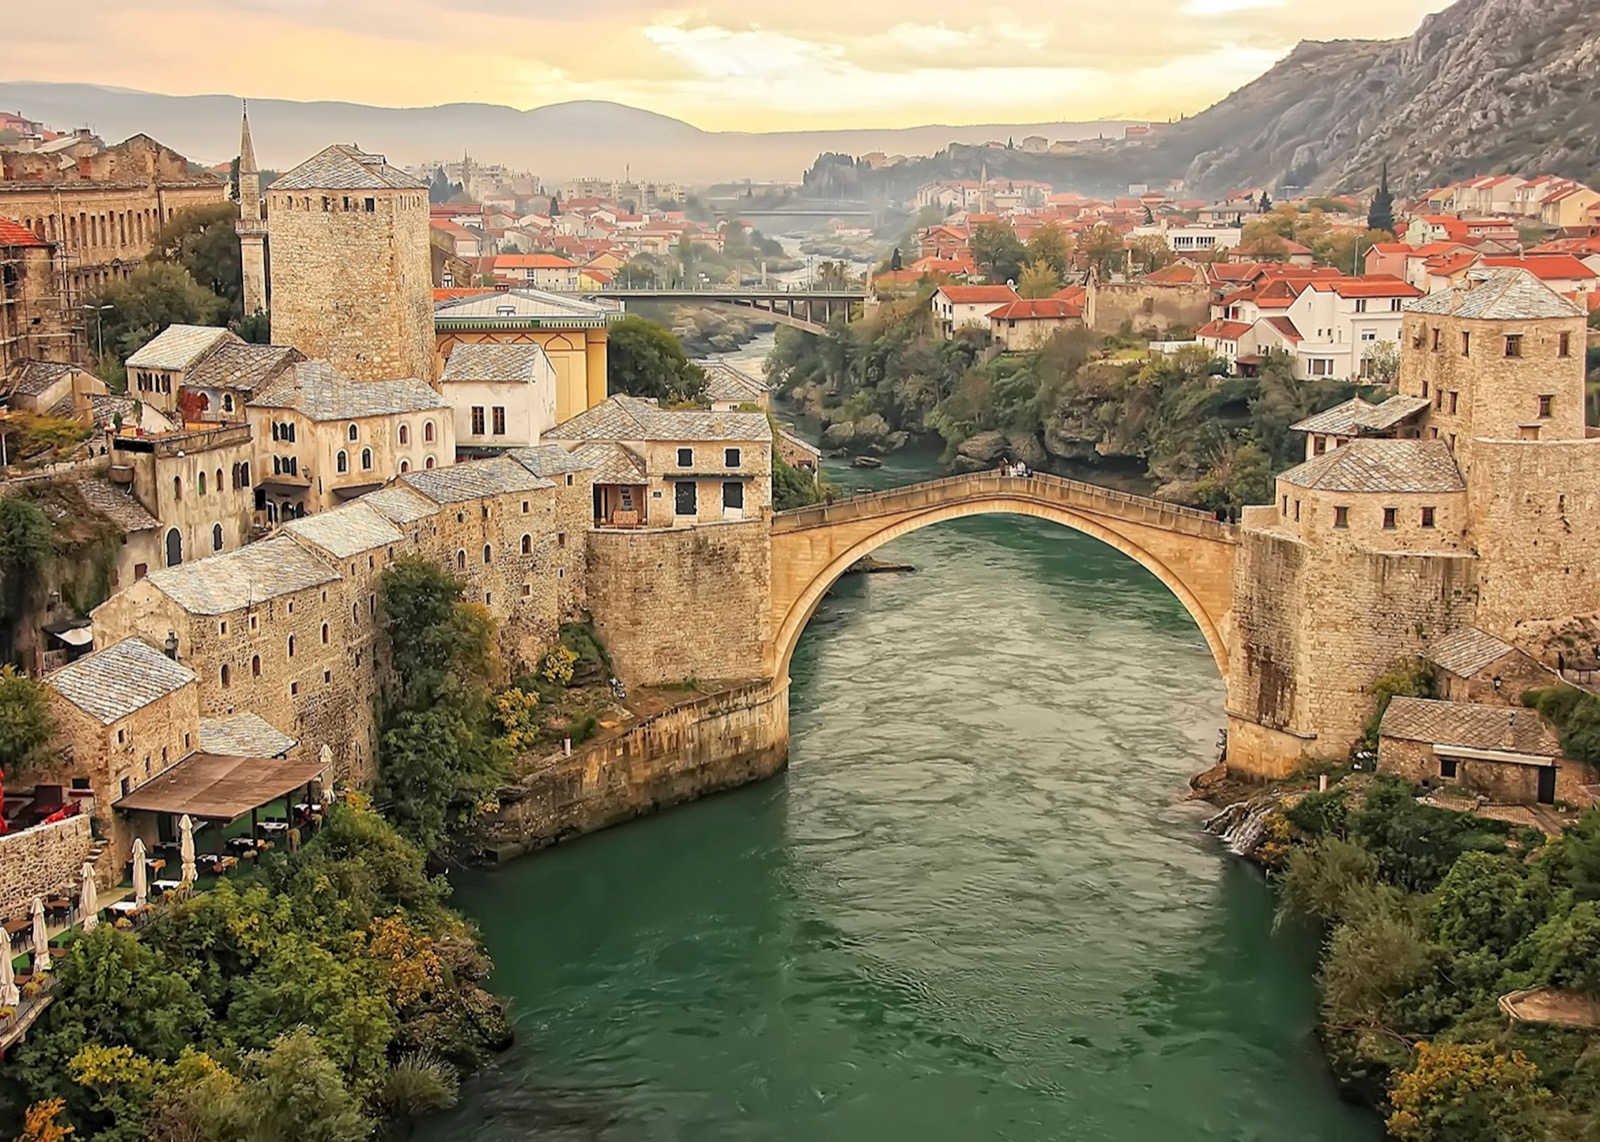 If You Can Score More Than 18 on This Famous Landmarks Quiz, You Probably Know All About the World Bosnia and Herzegovina